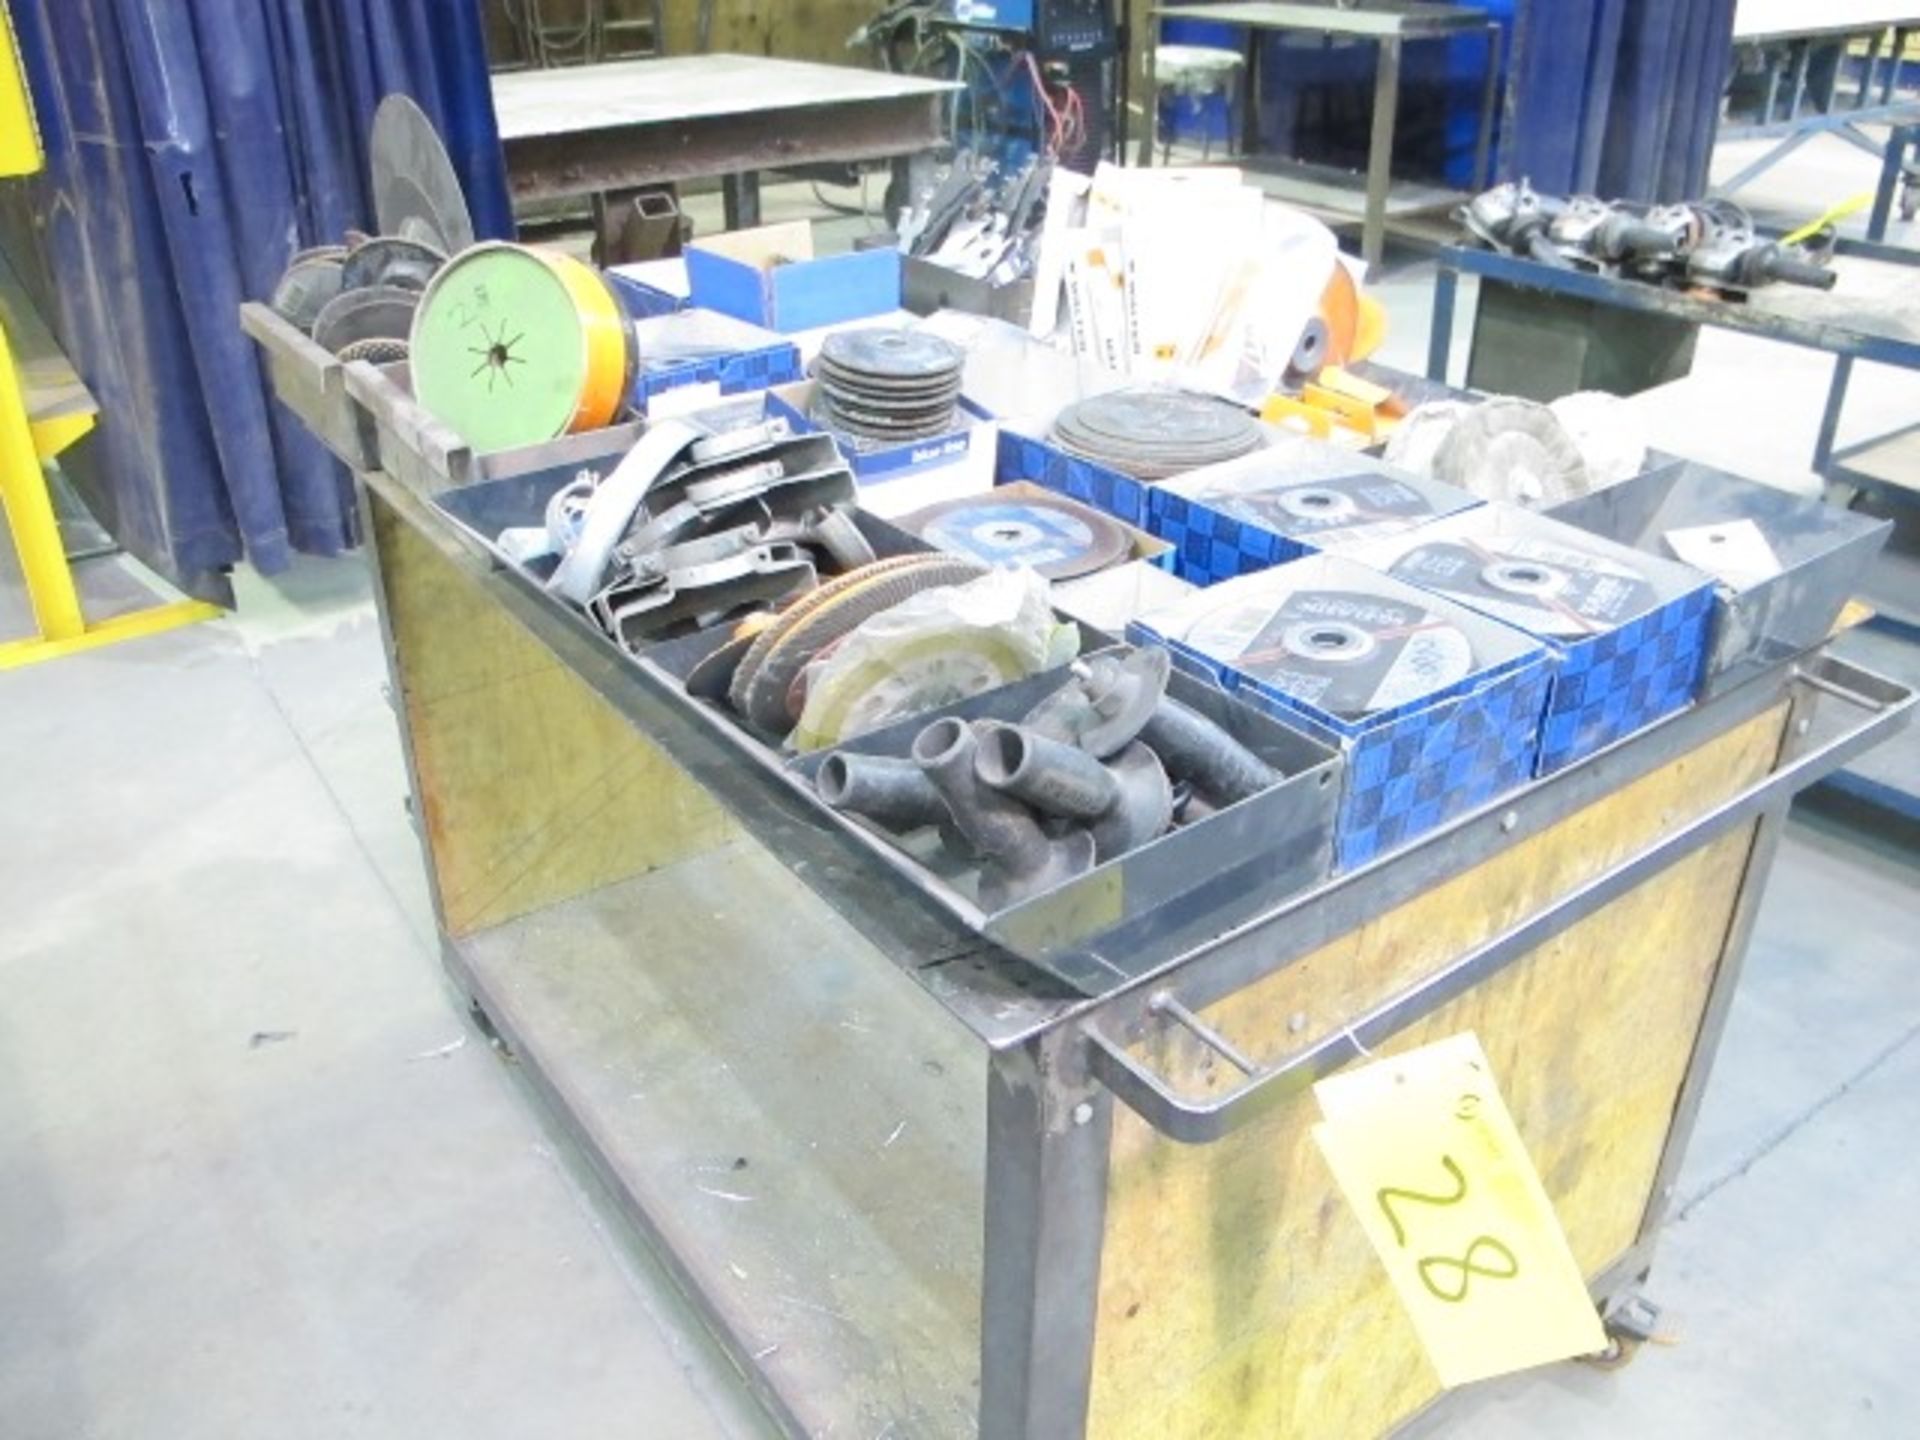 QUANTITY OF GRINDER SUPPLIES INCLUDING GRINDING WHEELS, BUFFING ATTACHMENT, WALTER QUICK STEP